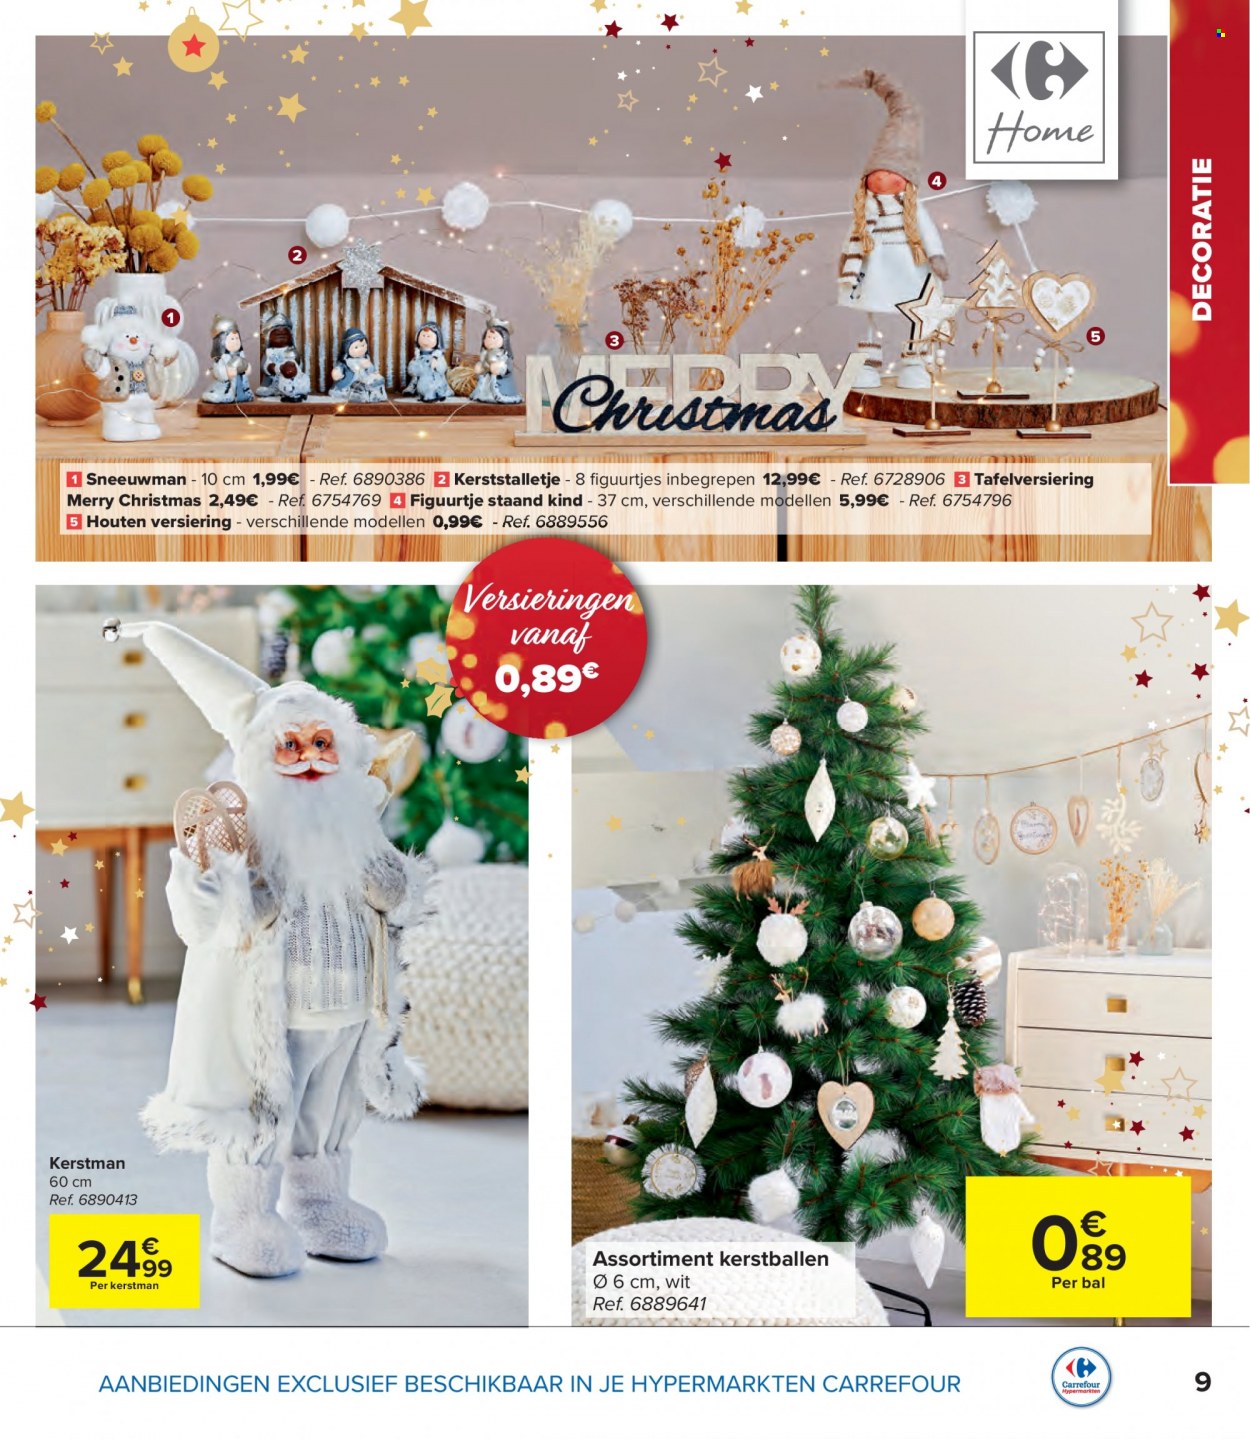 Catalogue Carrefour hypermarkt - 16.11.2022 - 31.12.2022. Page 9.